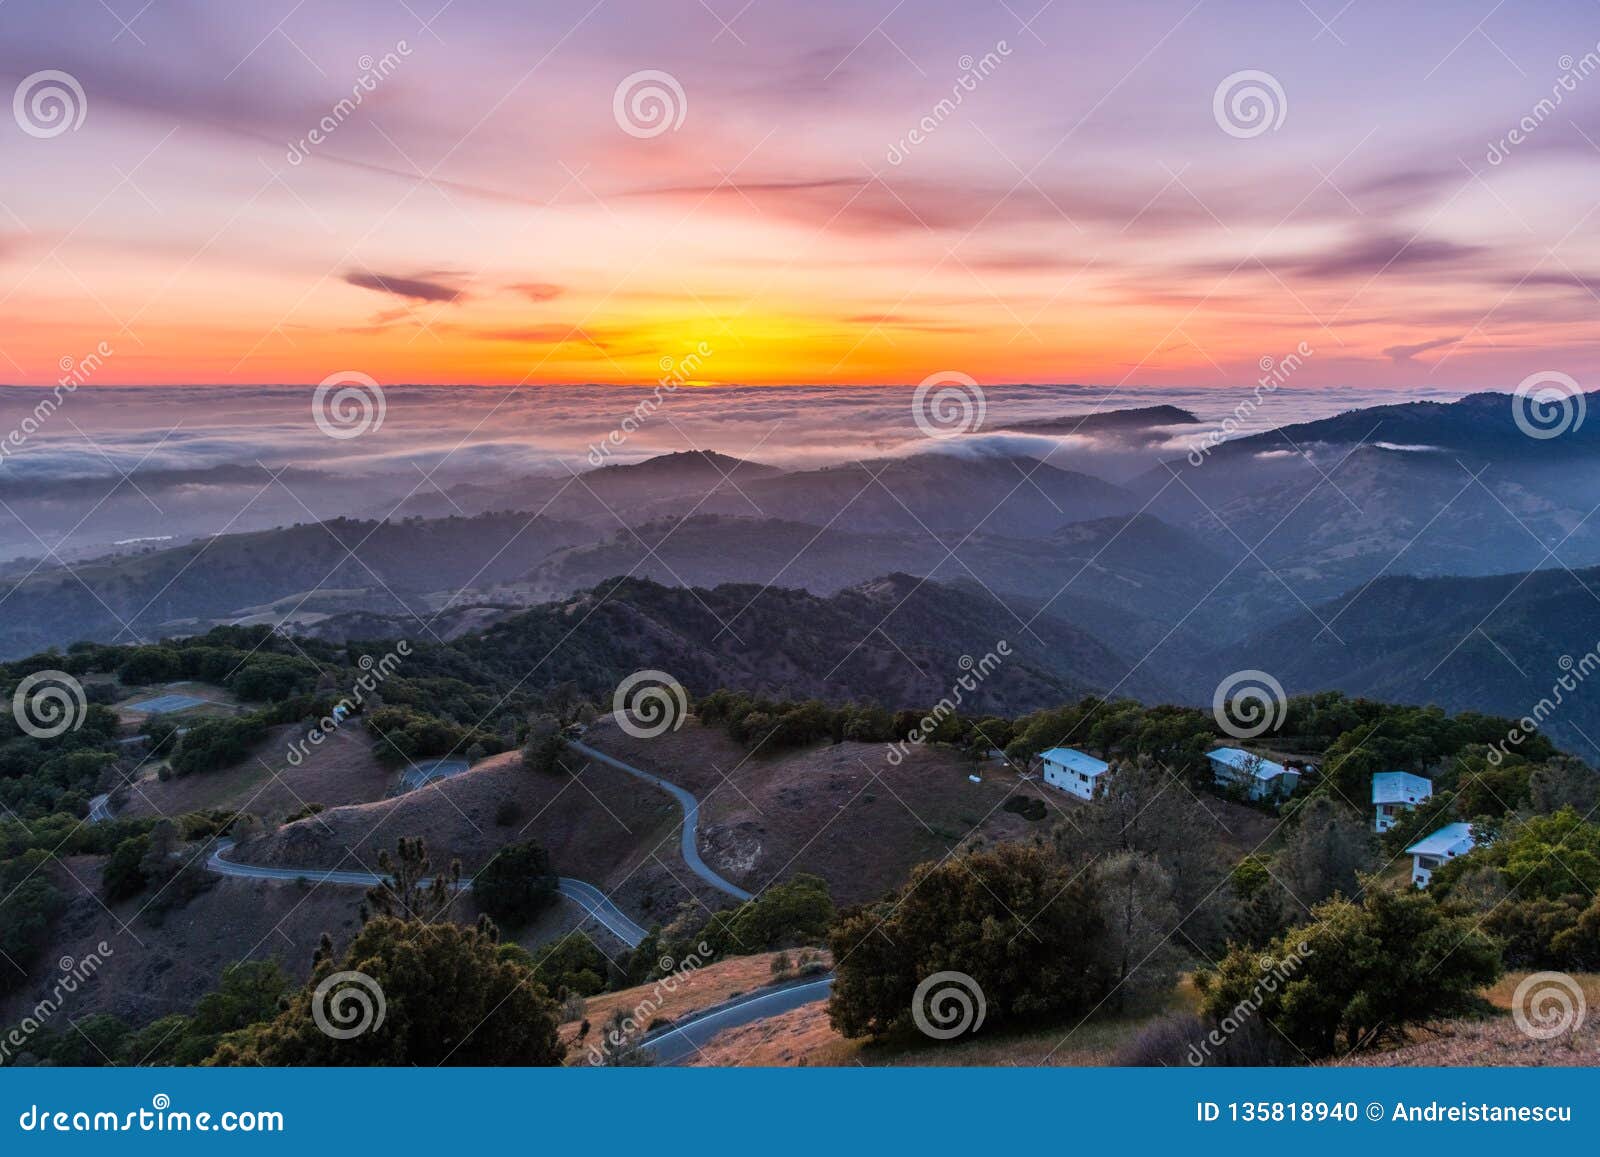 sunset afterglow over a sea of clouds; winding road descending through rolling hills in the foreground; mt hamilton, san jose,